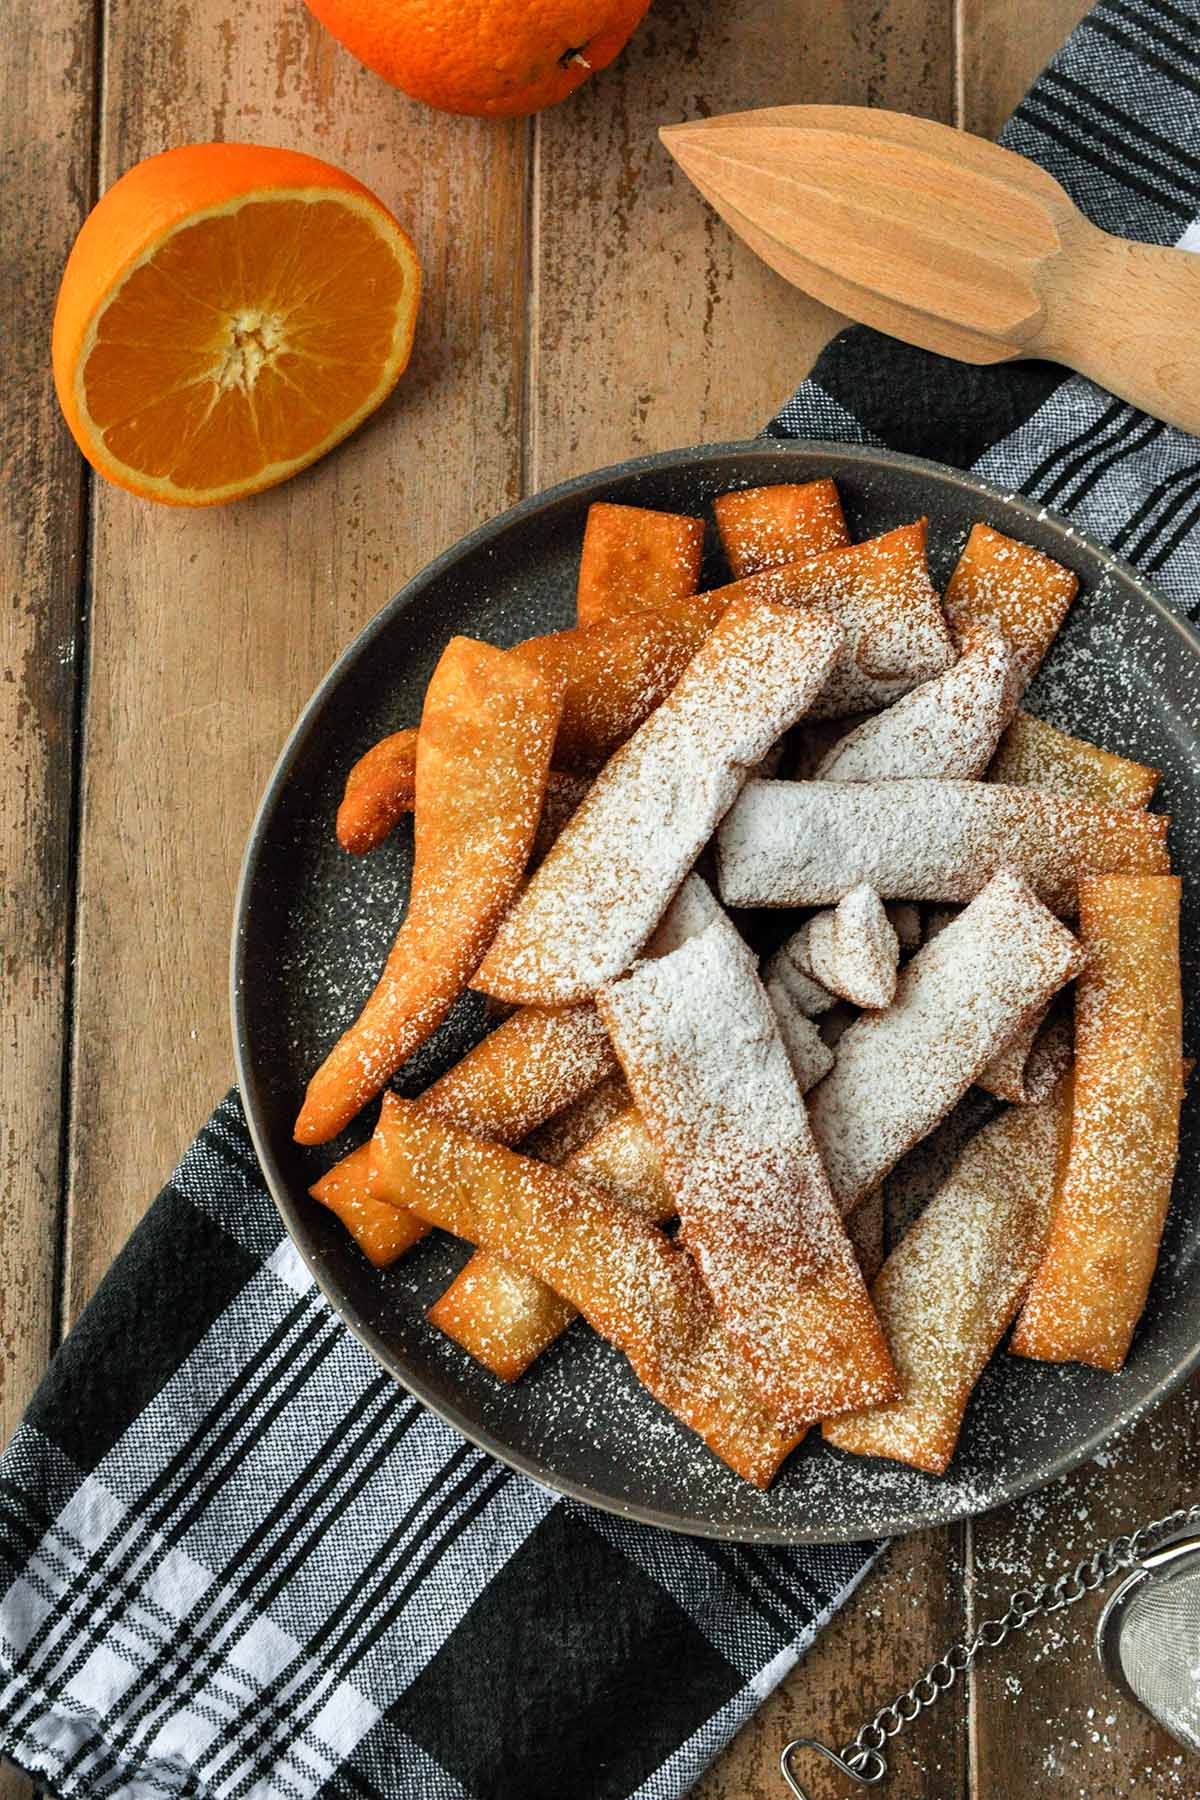 On a black and white towel sits a plate of hojuelas that has been dusted with powdered sugar. Half an orange and a citrus reamer are nearby.